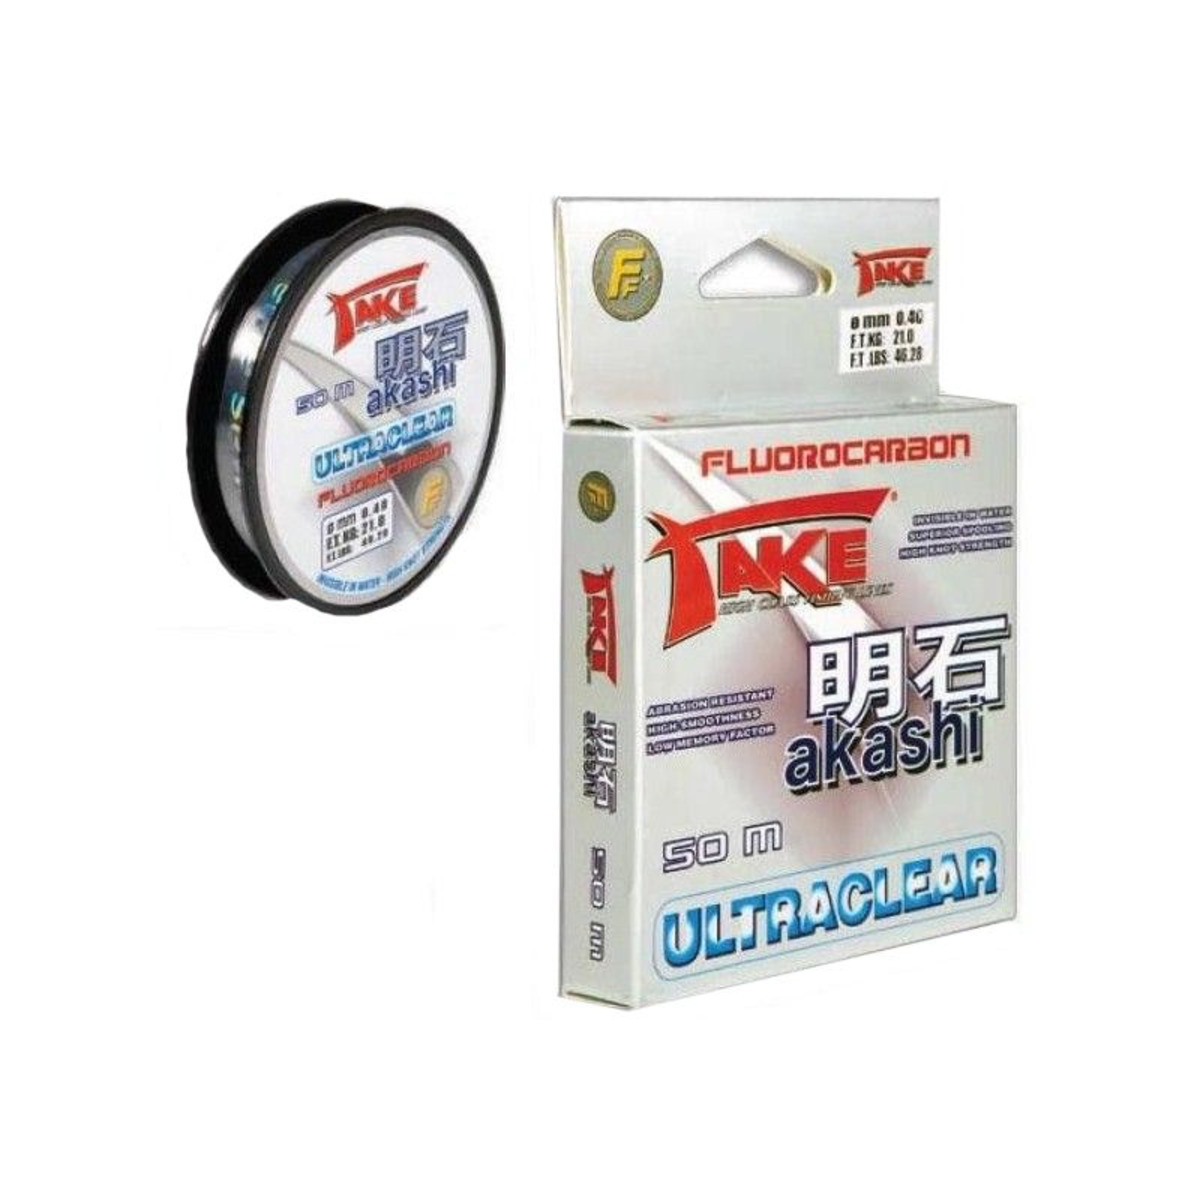 Lineaeffe Take Akashi Fluorocarbon Ultraclear - 0.20 mm - 50 m